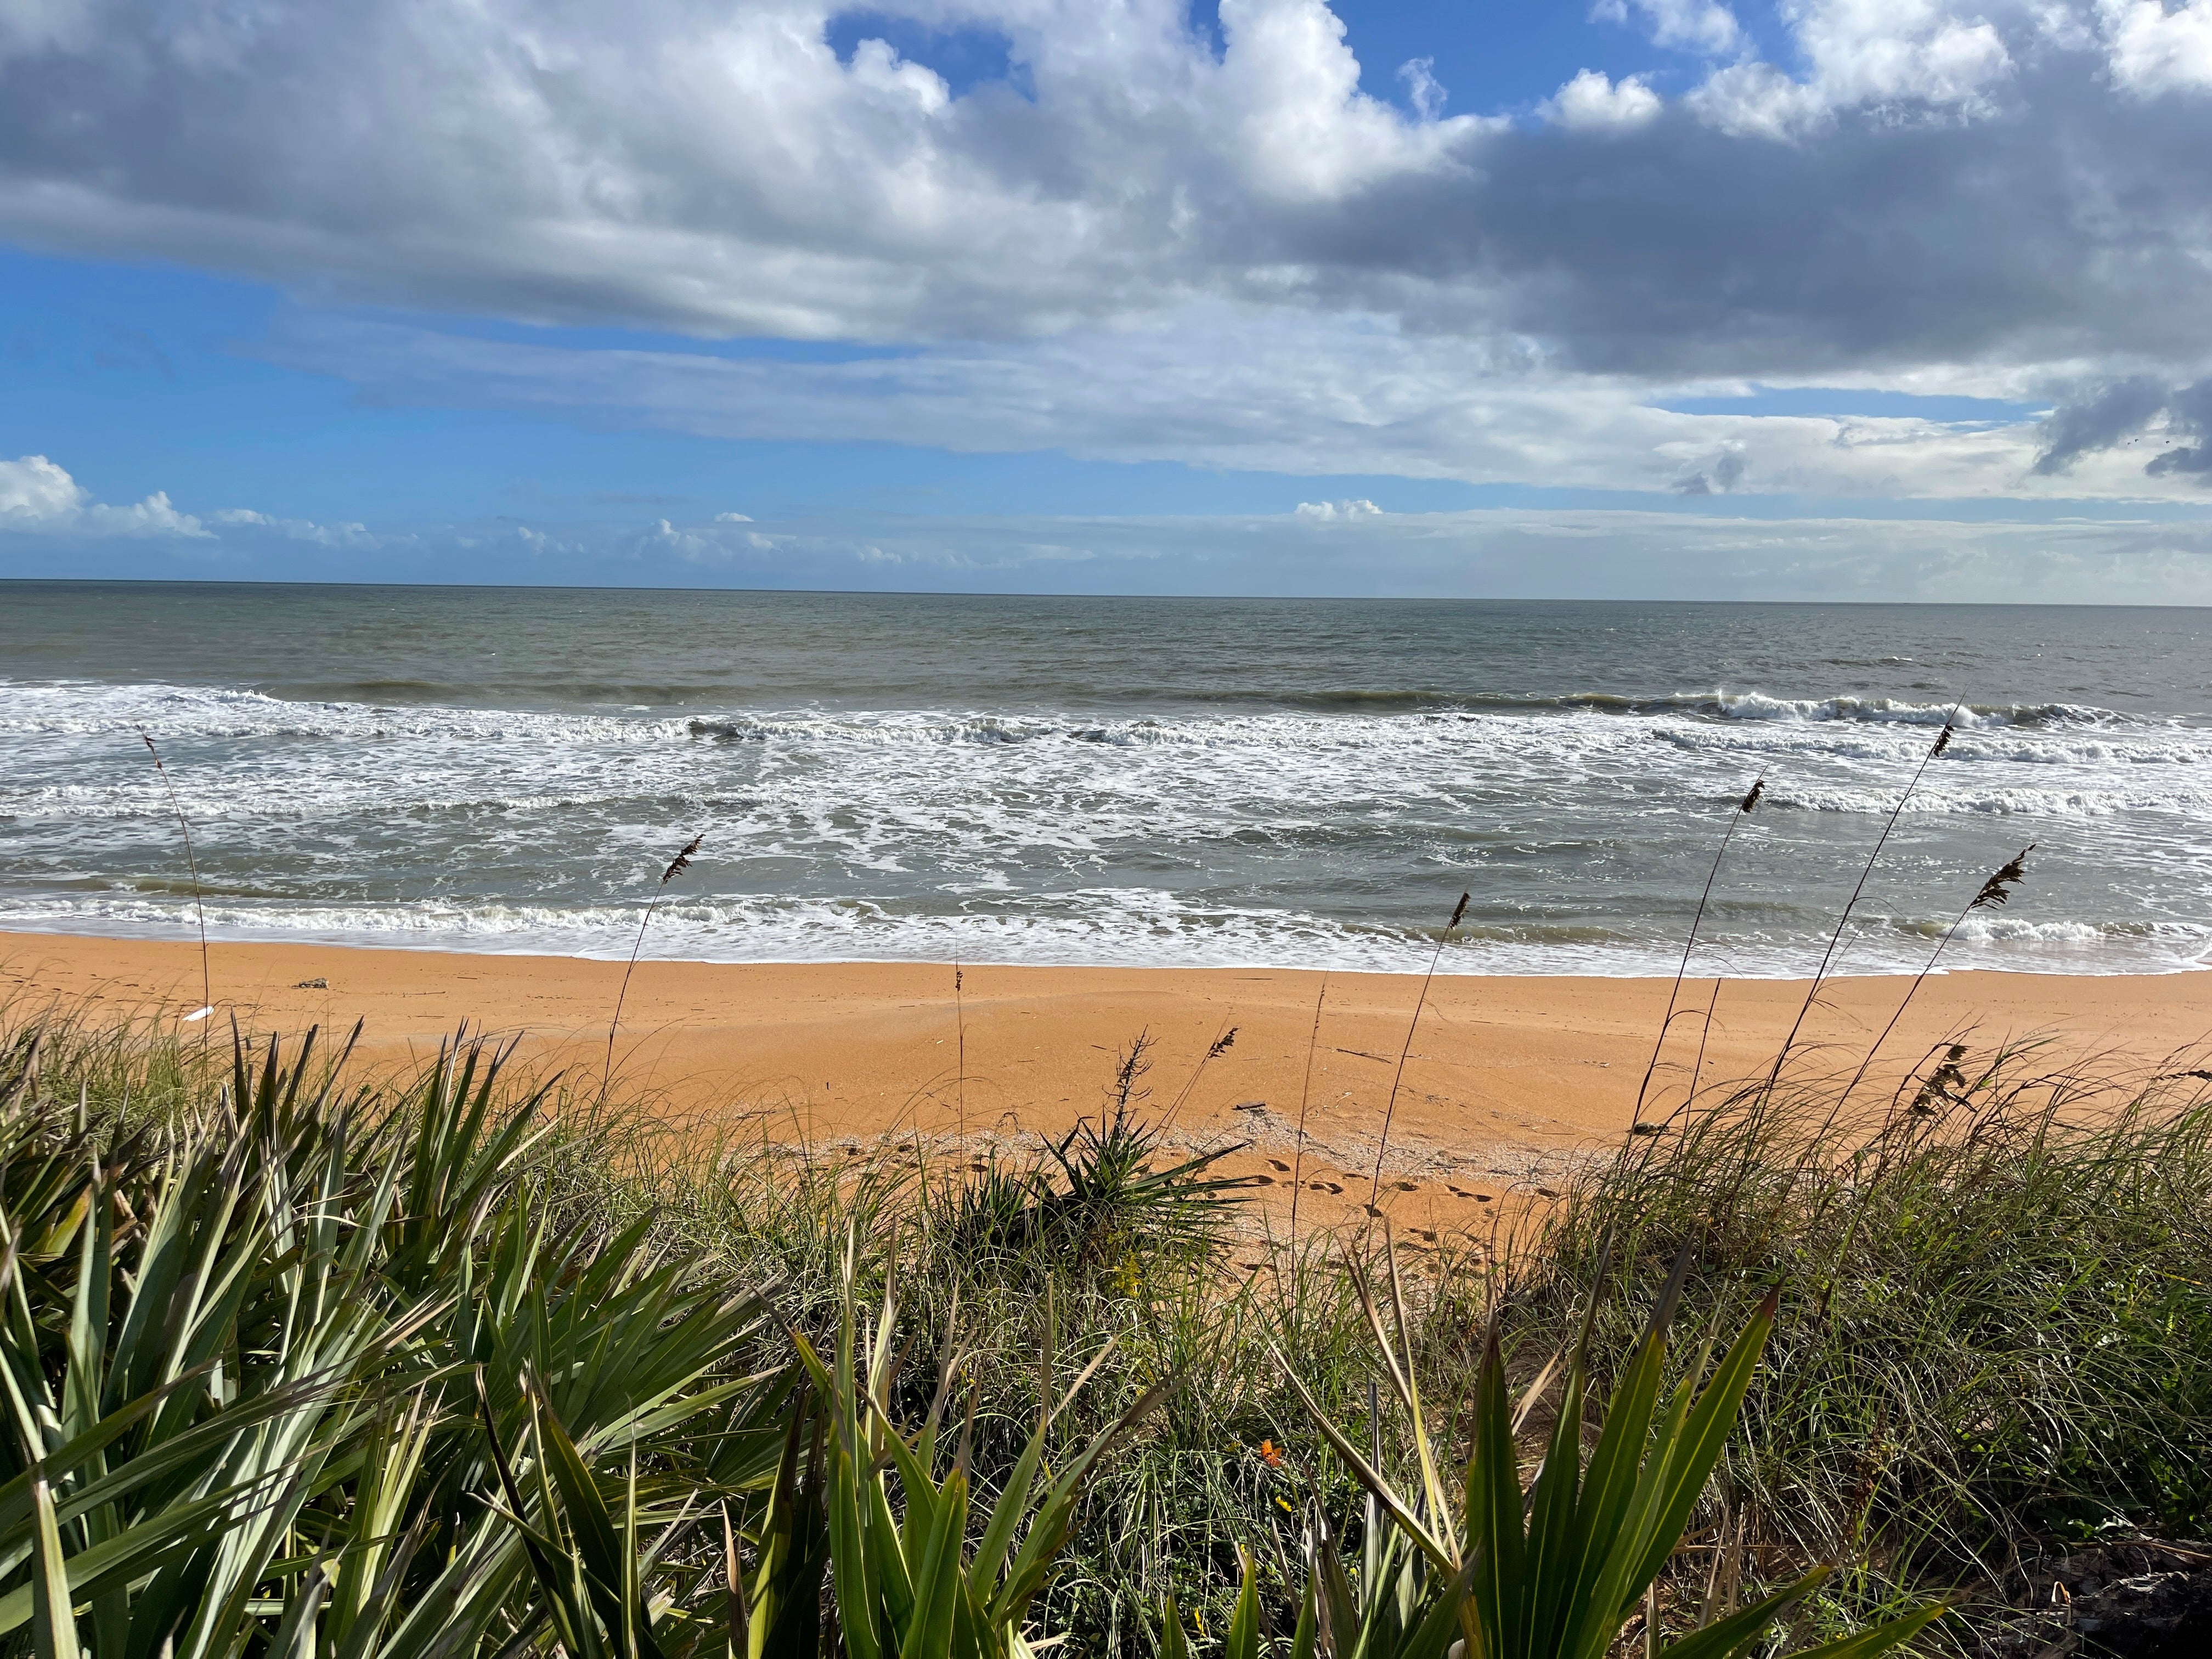 Camper submitted image from Gamble Rogers Memorial State Recreation Area at Flagler Beach - 2